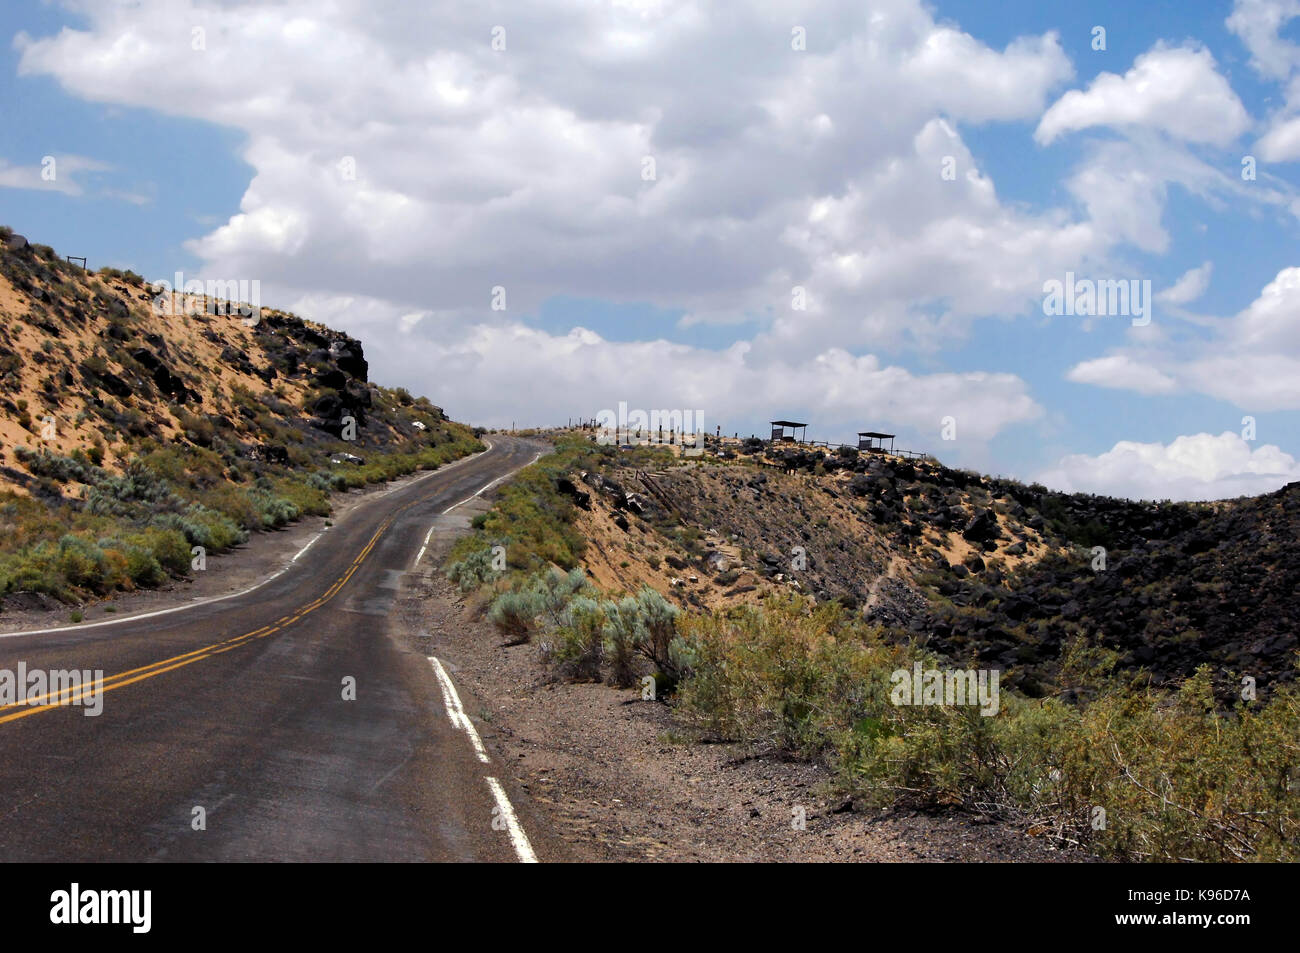 Road curves around the Petroglyph National Monument in Albuquerque, New Mexico. Stock Photo